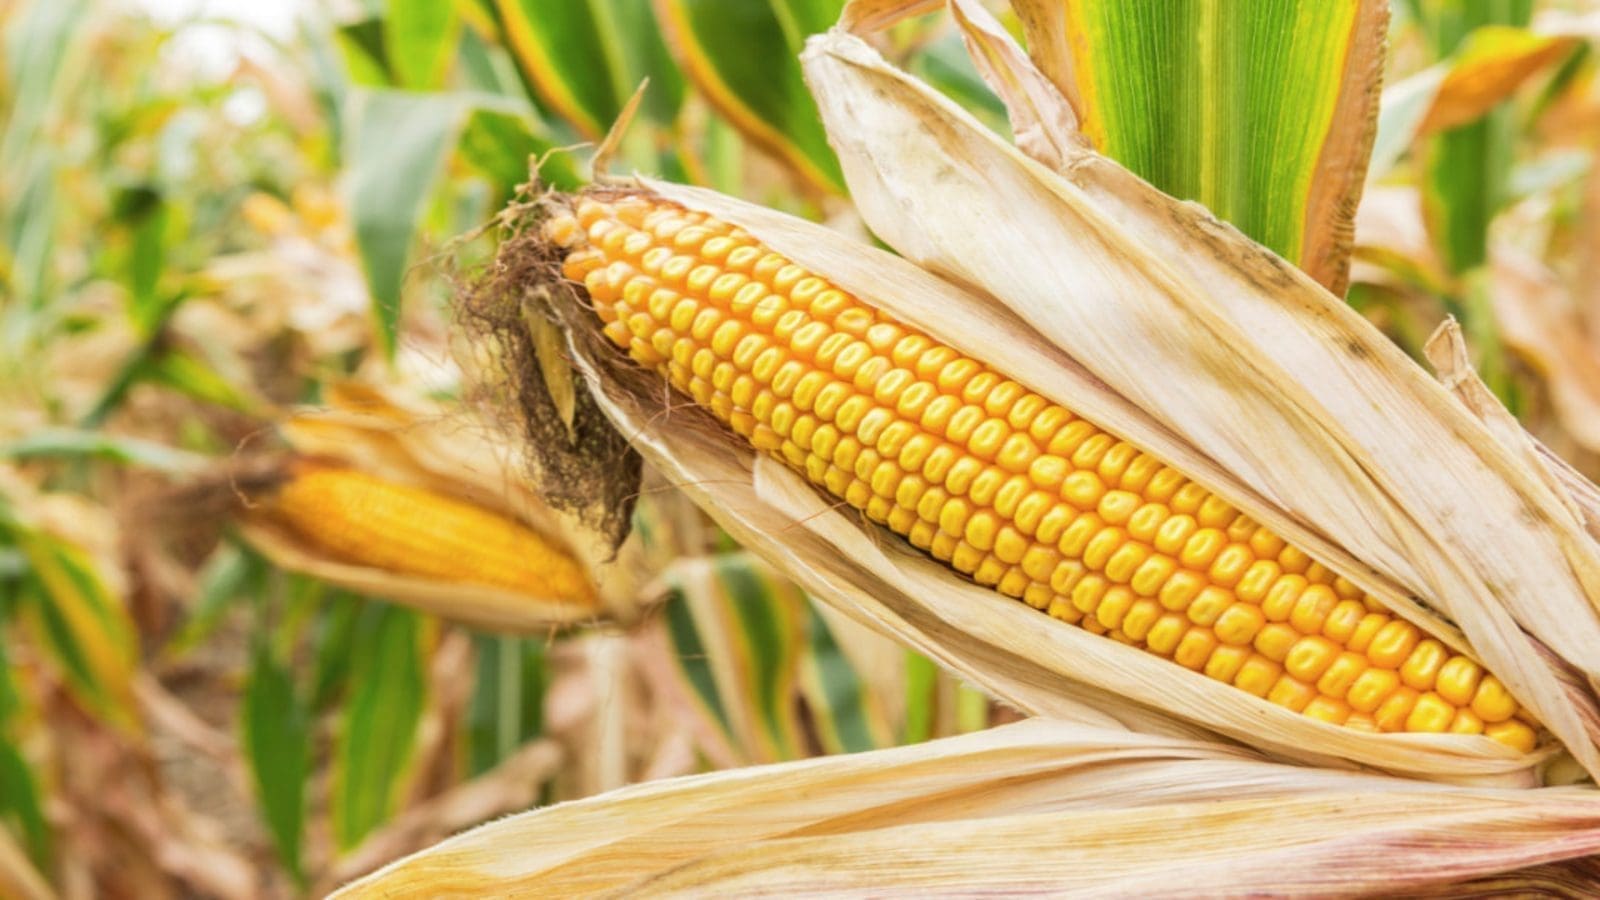 Origin Agritech receives approval for six new nutritionally enhanced corn varieties